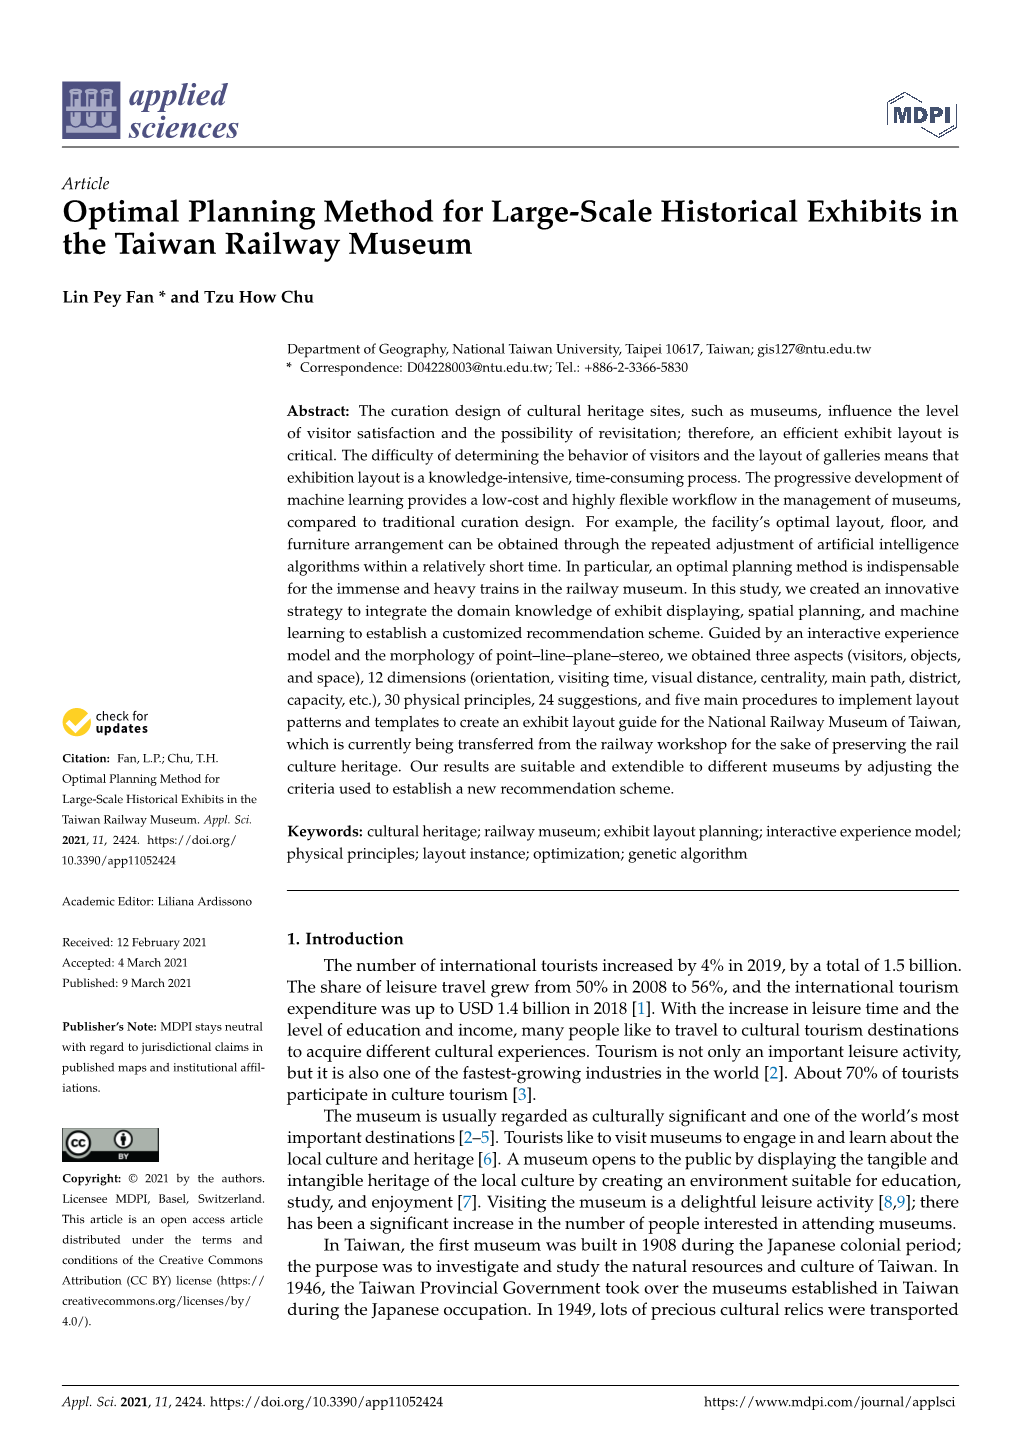 Optimal Planning Method for Large-Scale Historical Exhibits in the Taiwan Railway Museum